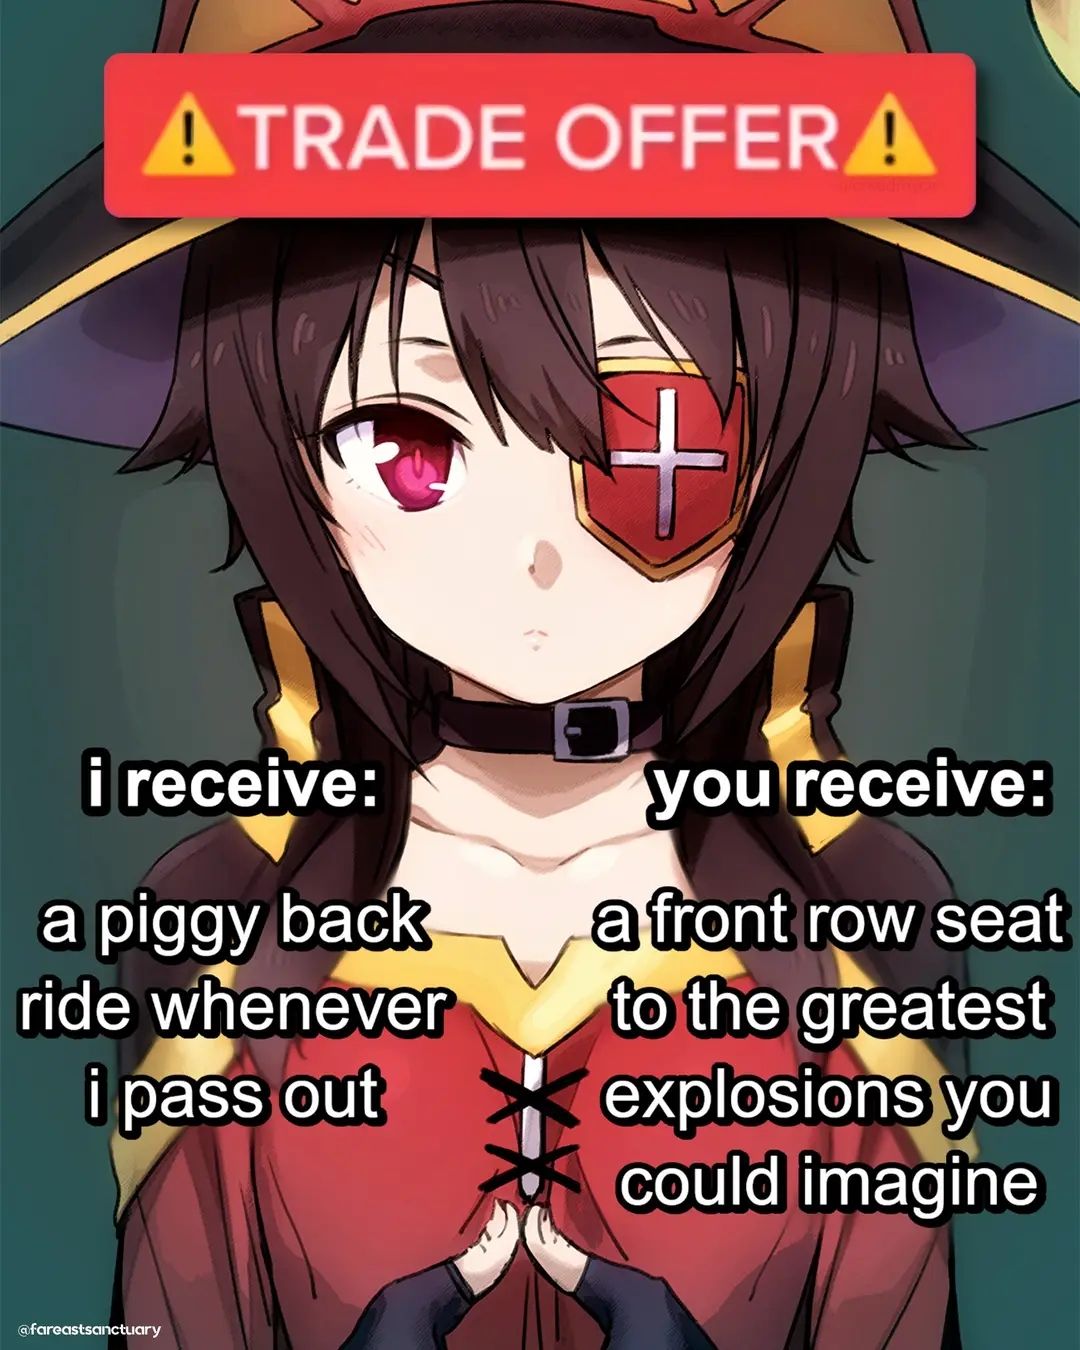 Greatest trade offer